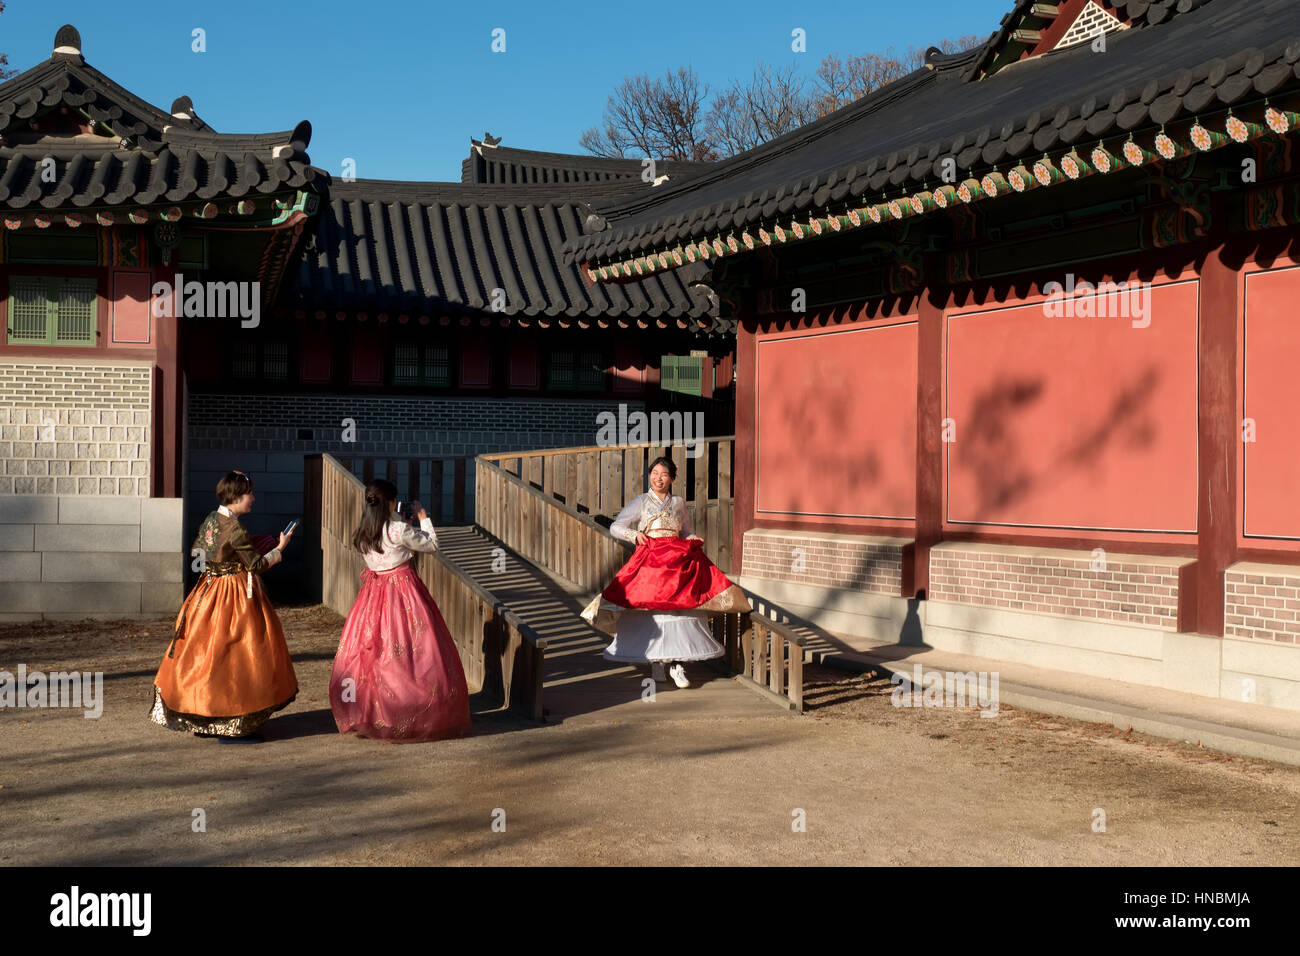 Happy girls wearing hanbok, young women with traditional Korean dress at Changdeokgung Palace, monument. Seoul, South Korea, Asia Stock Photo